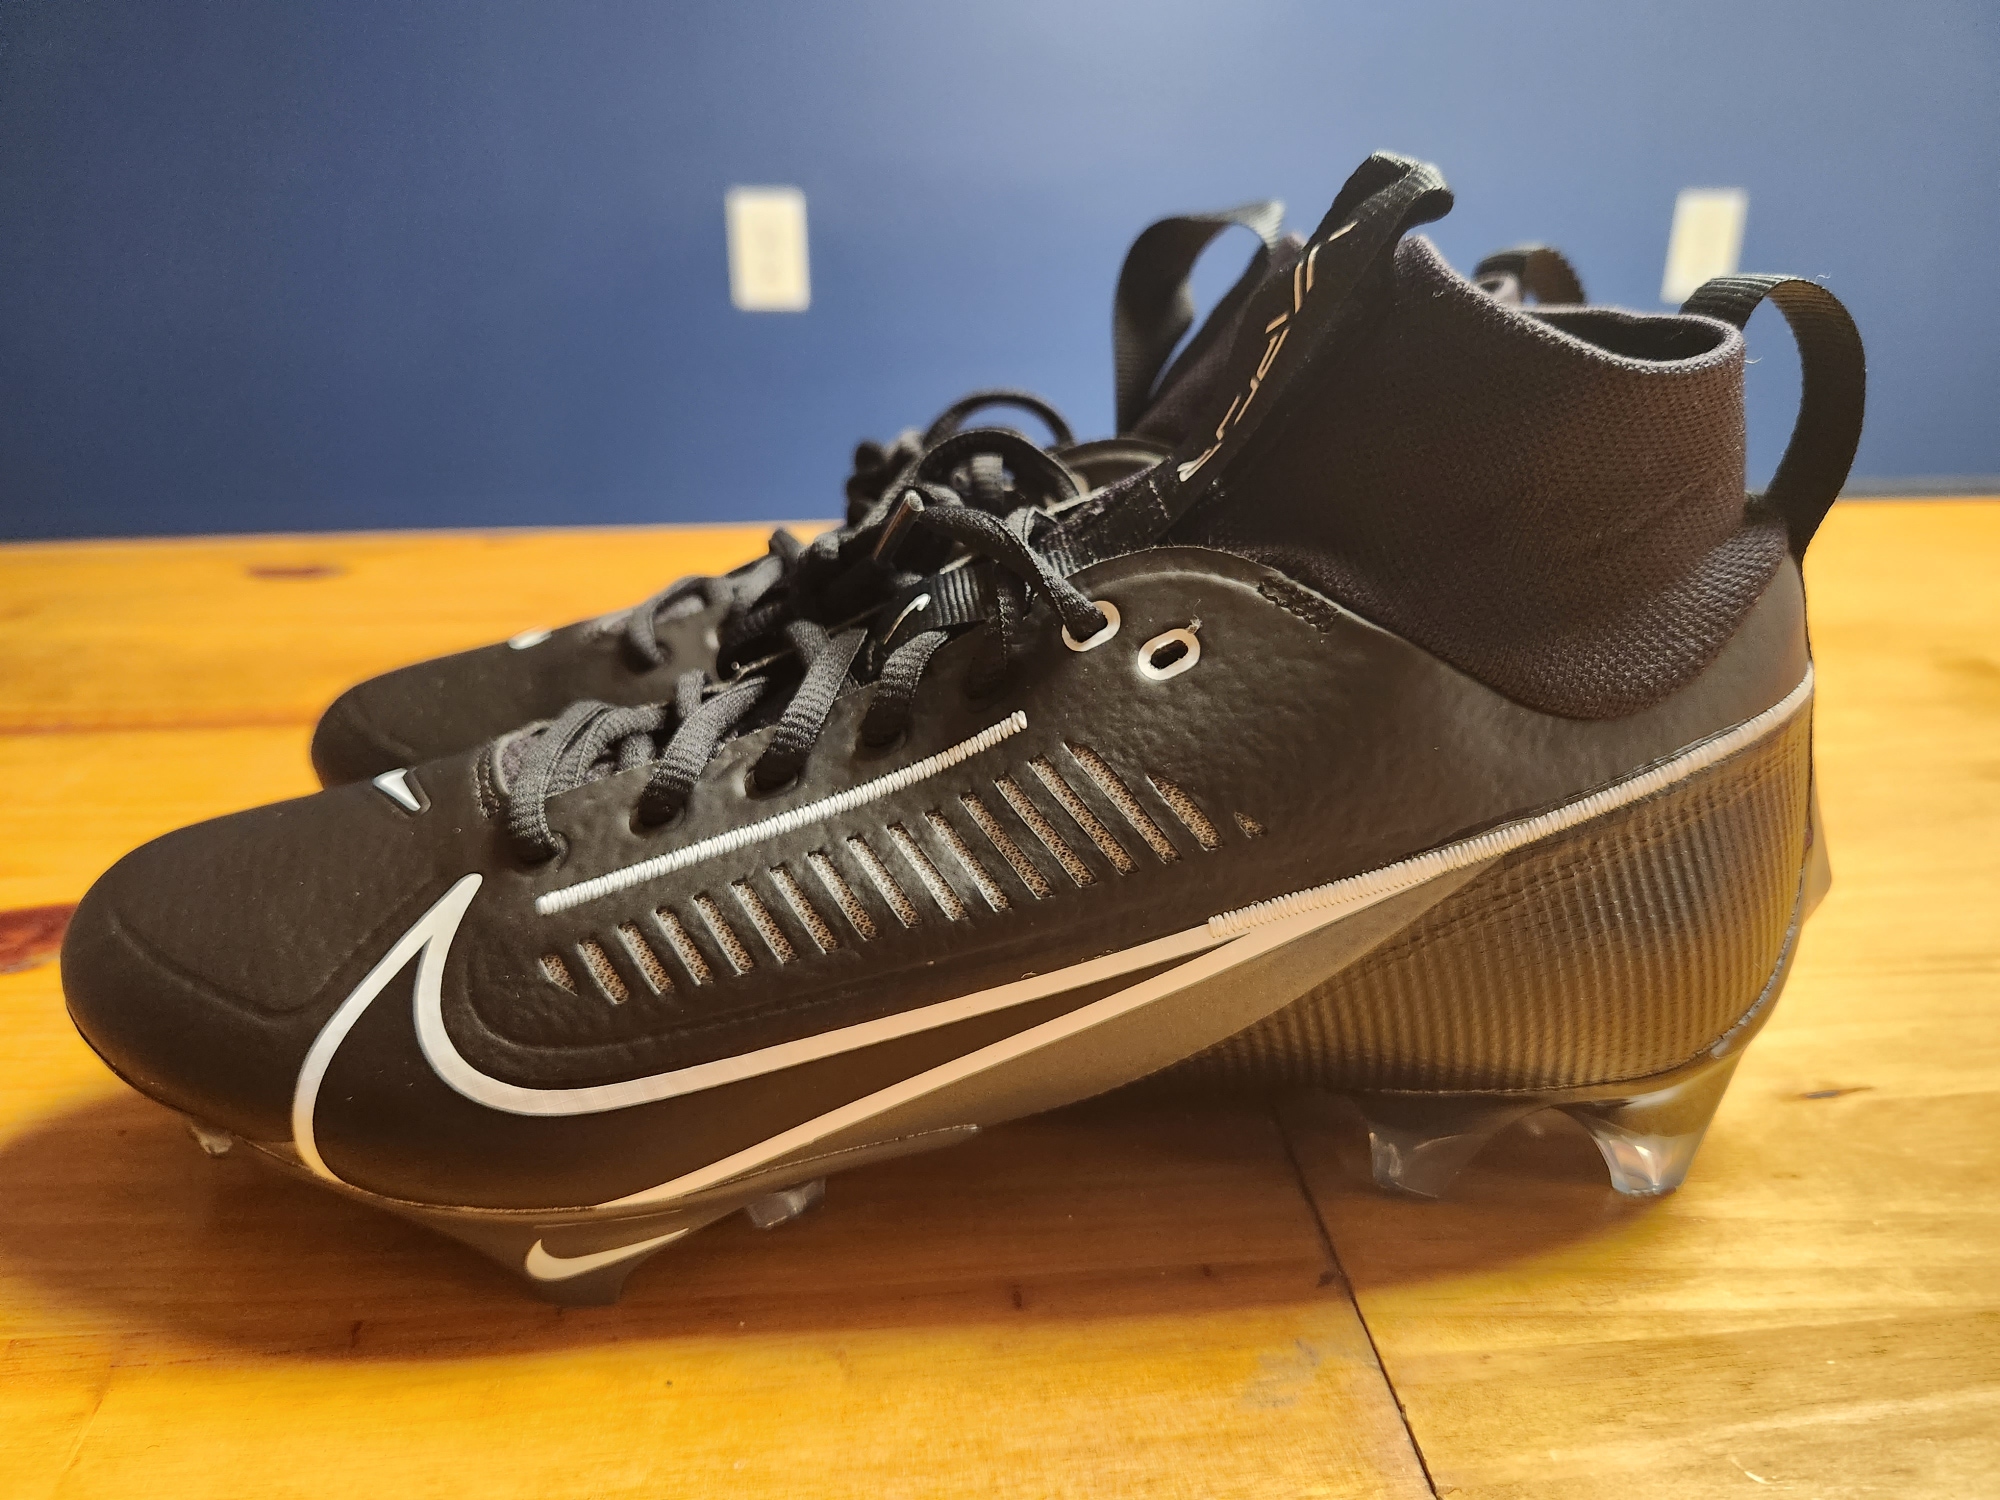 New Men's Size 10 (Women's 11) Molded Cleats Nike Mid Top